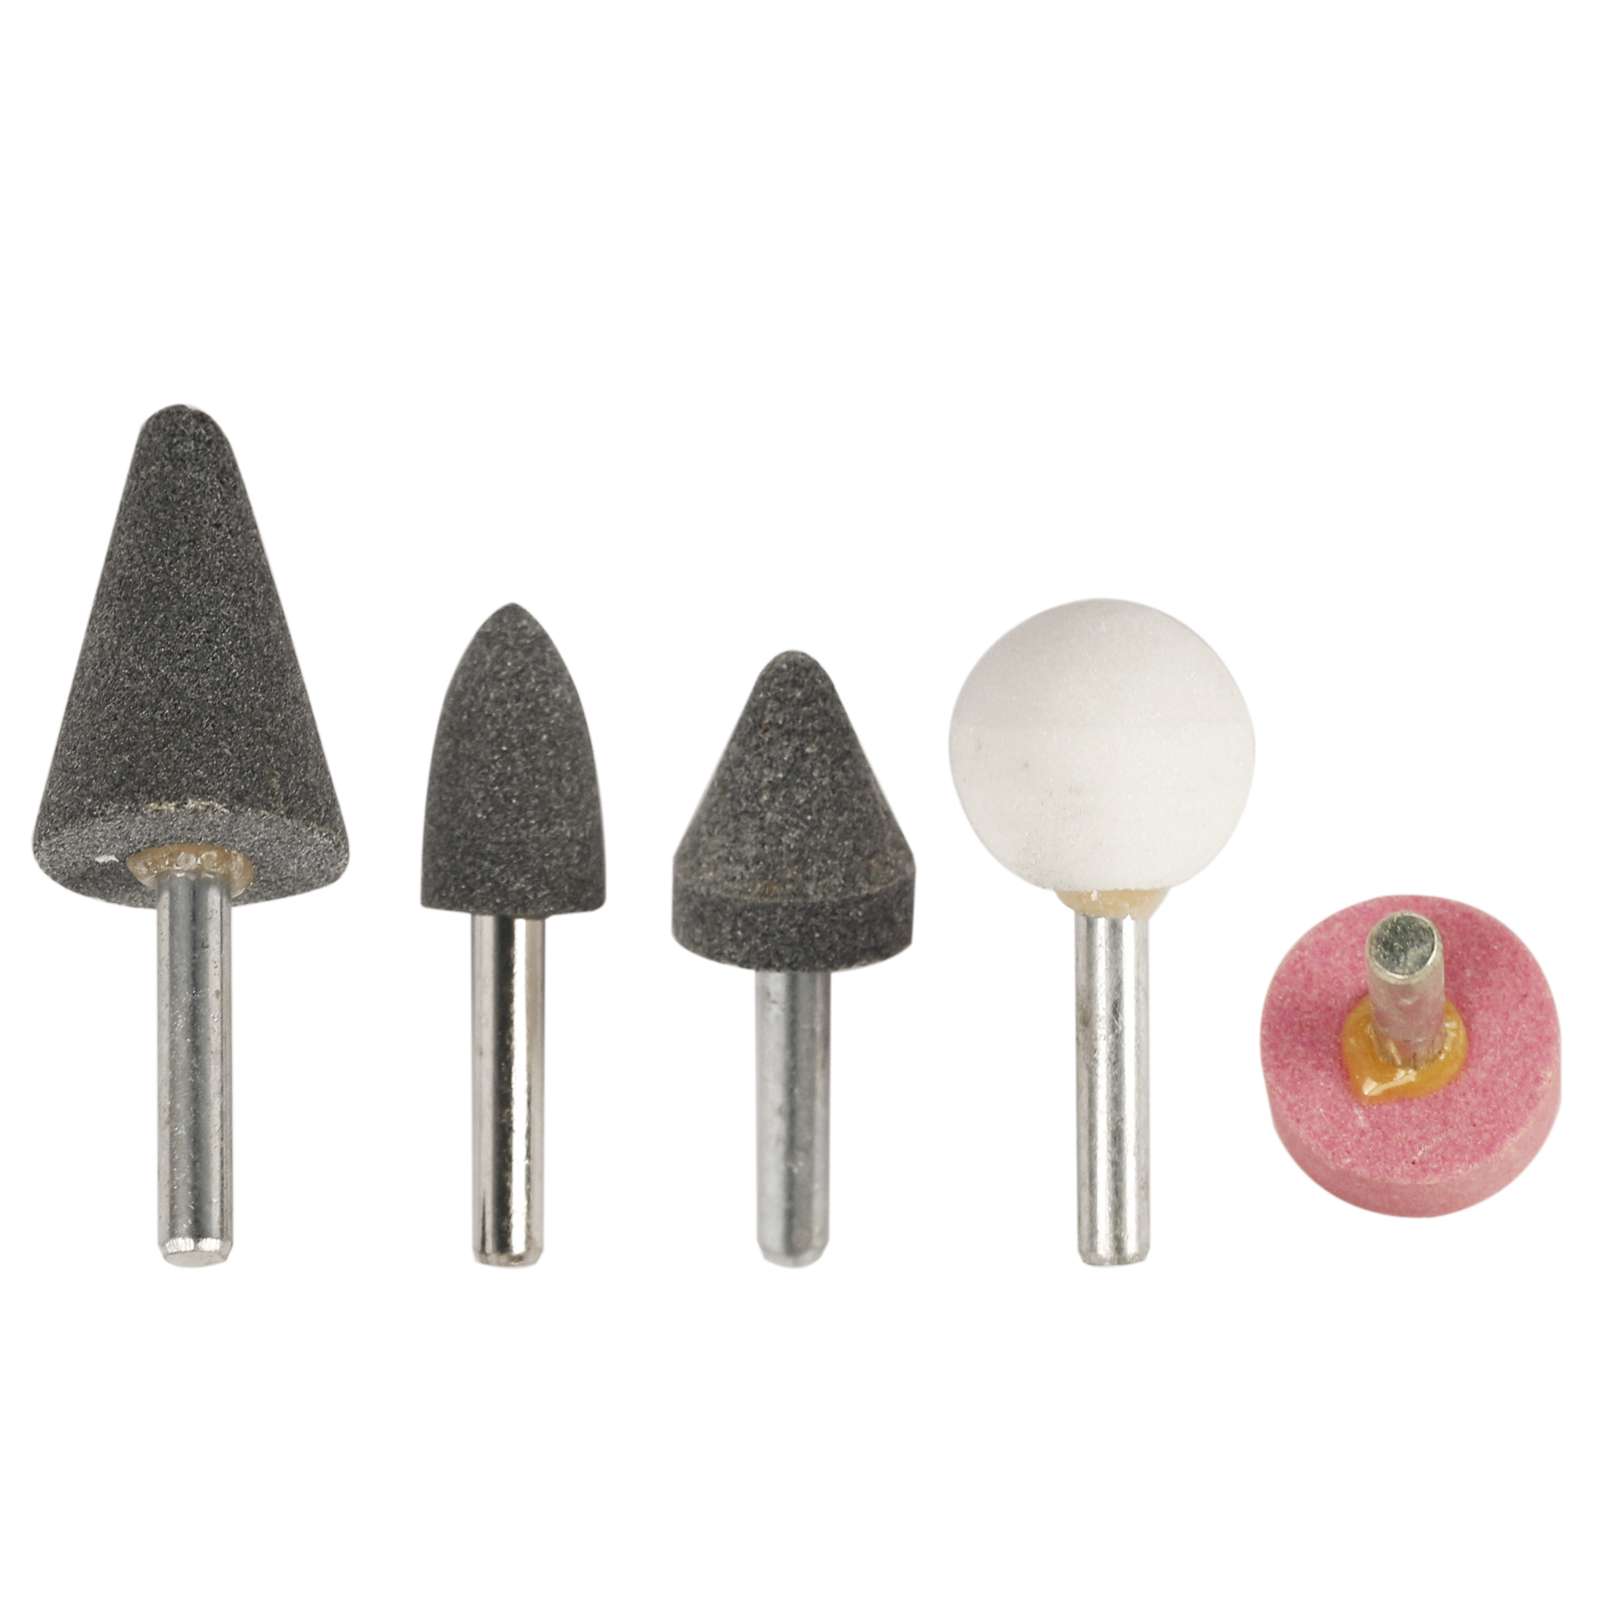 1/4" Drill Mounted Stone Kit, 5 Pieces - 1